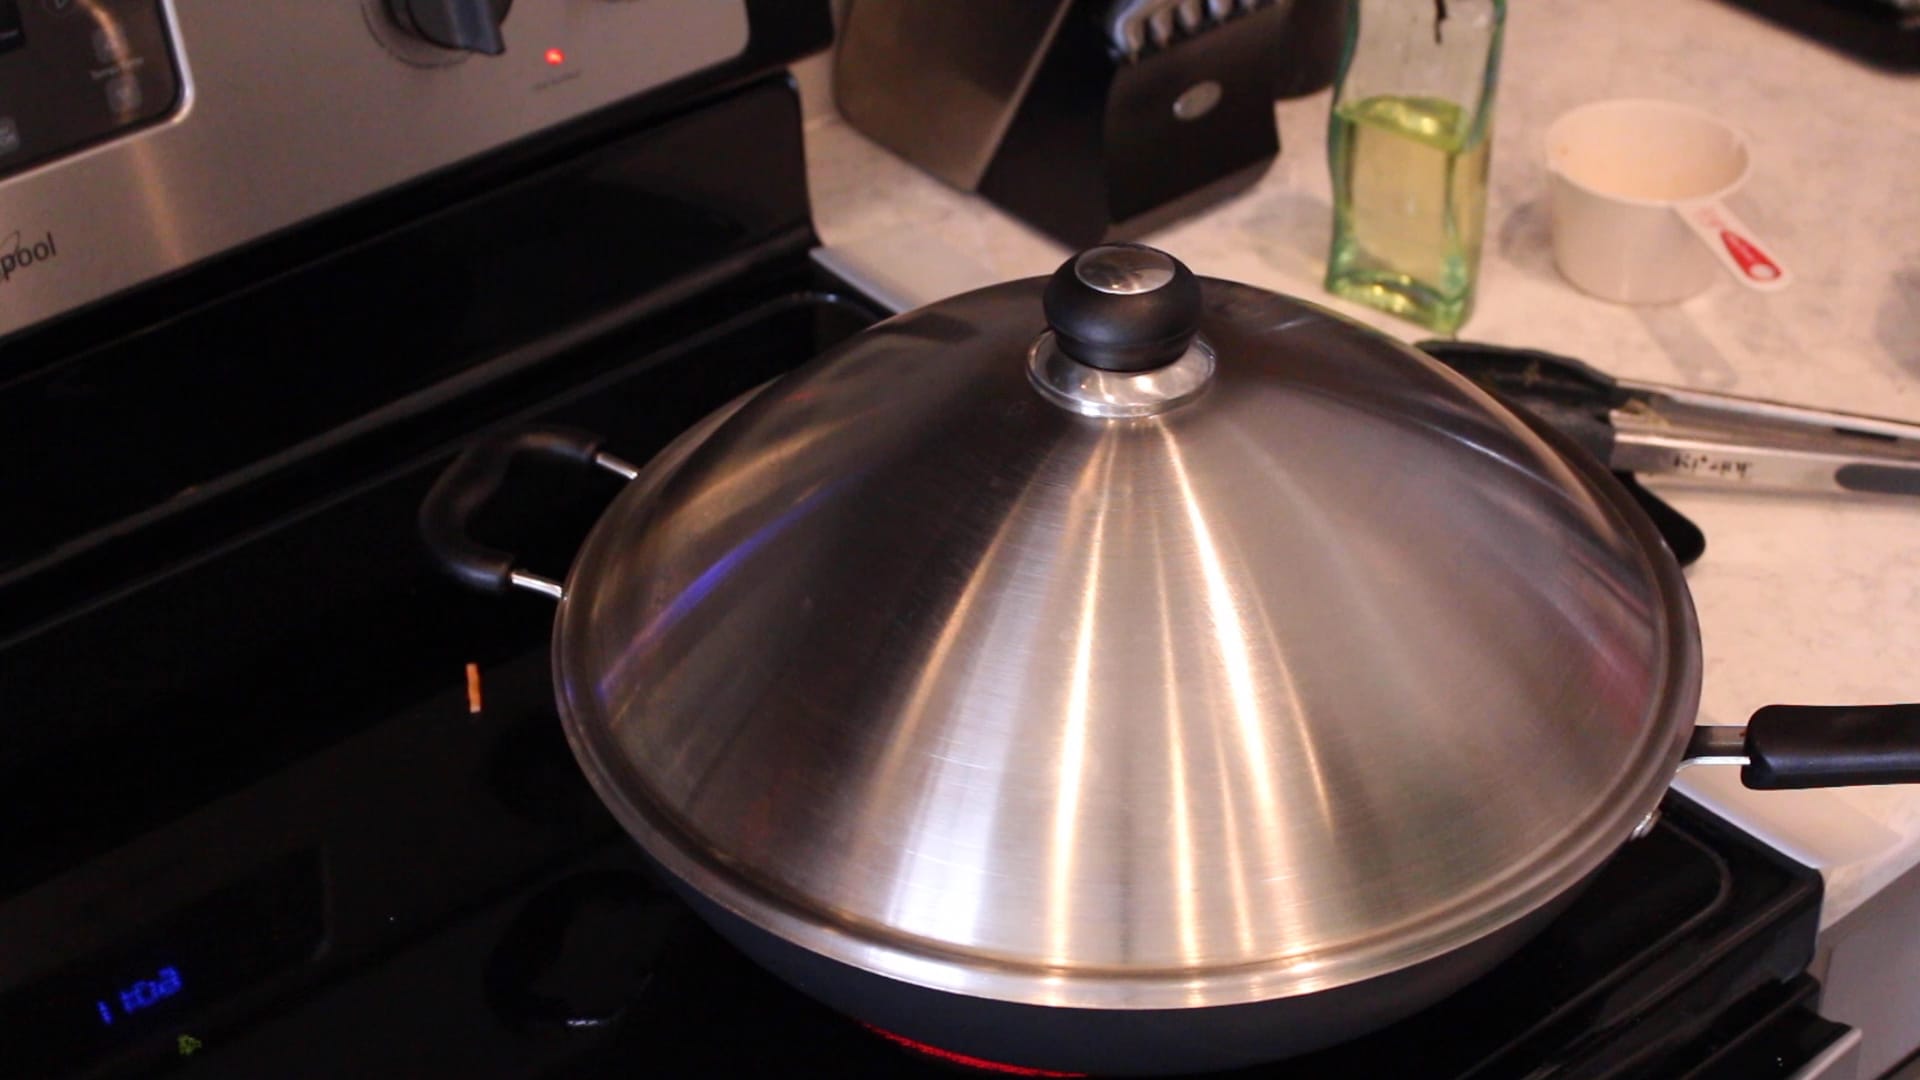 A wok with a lid on a stove.